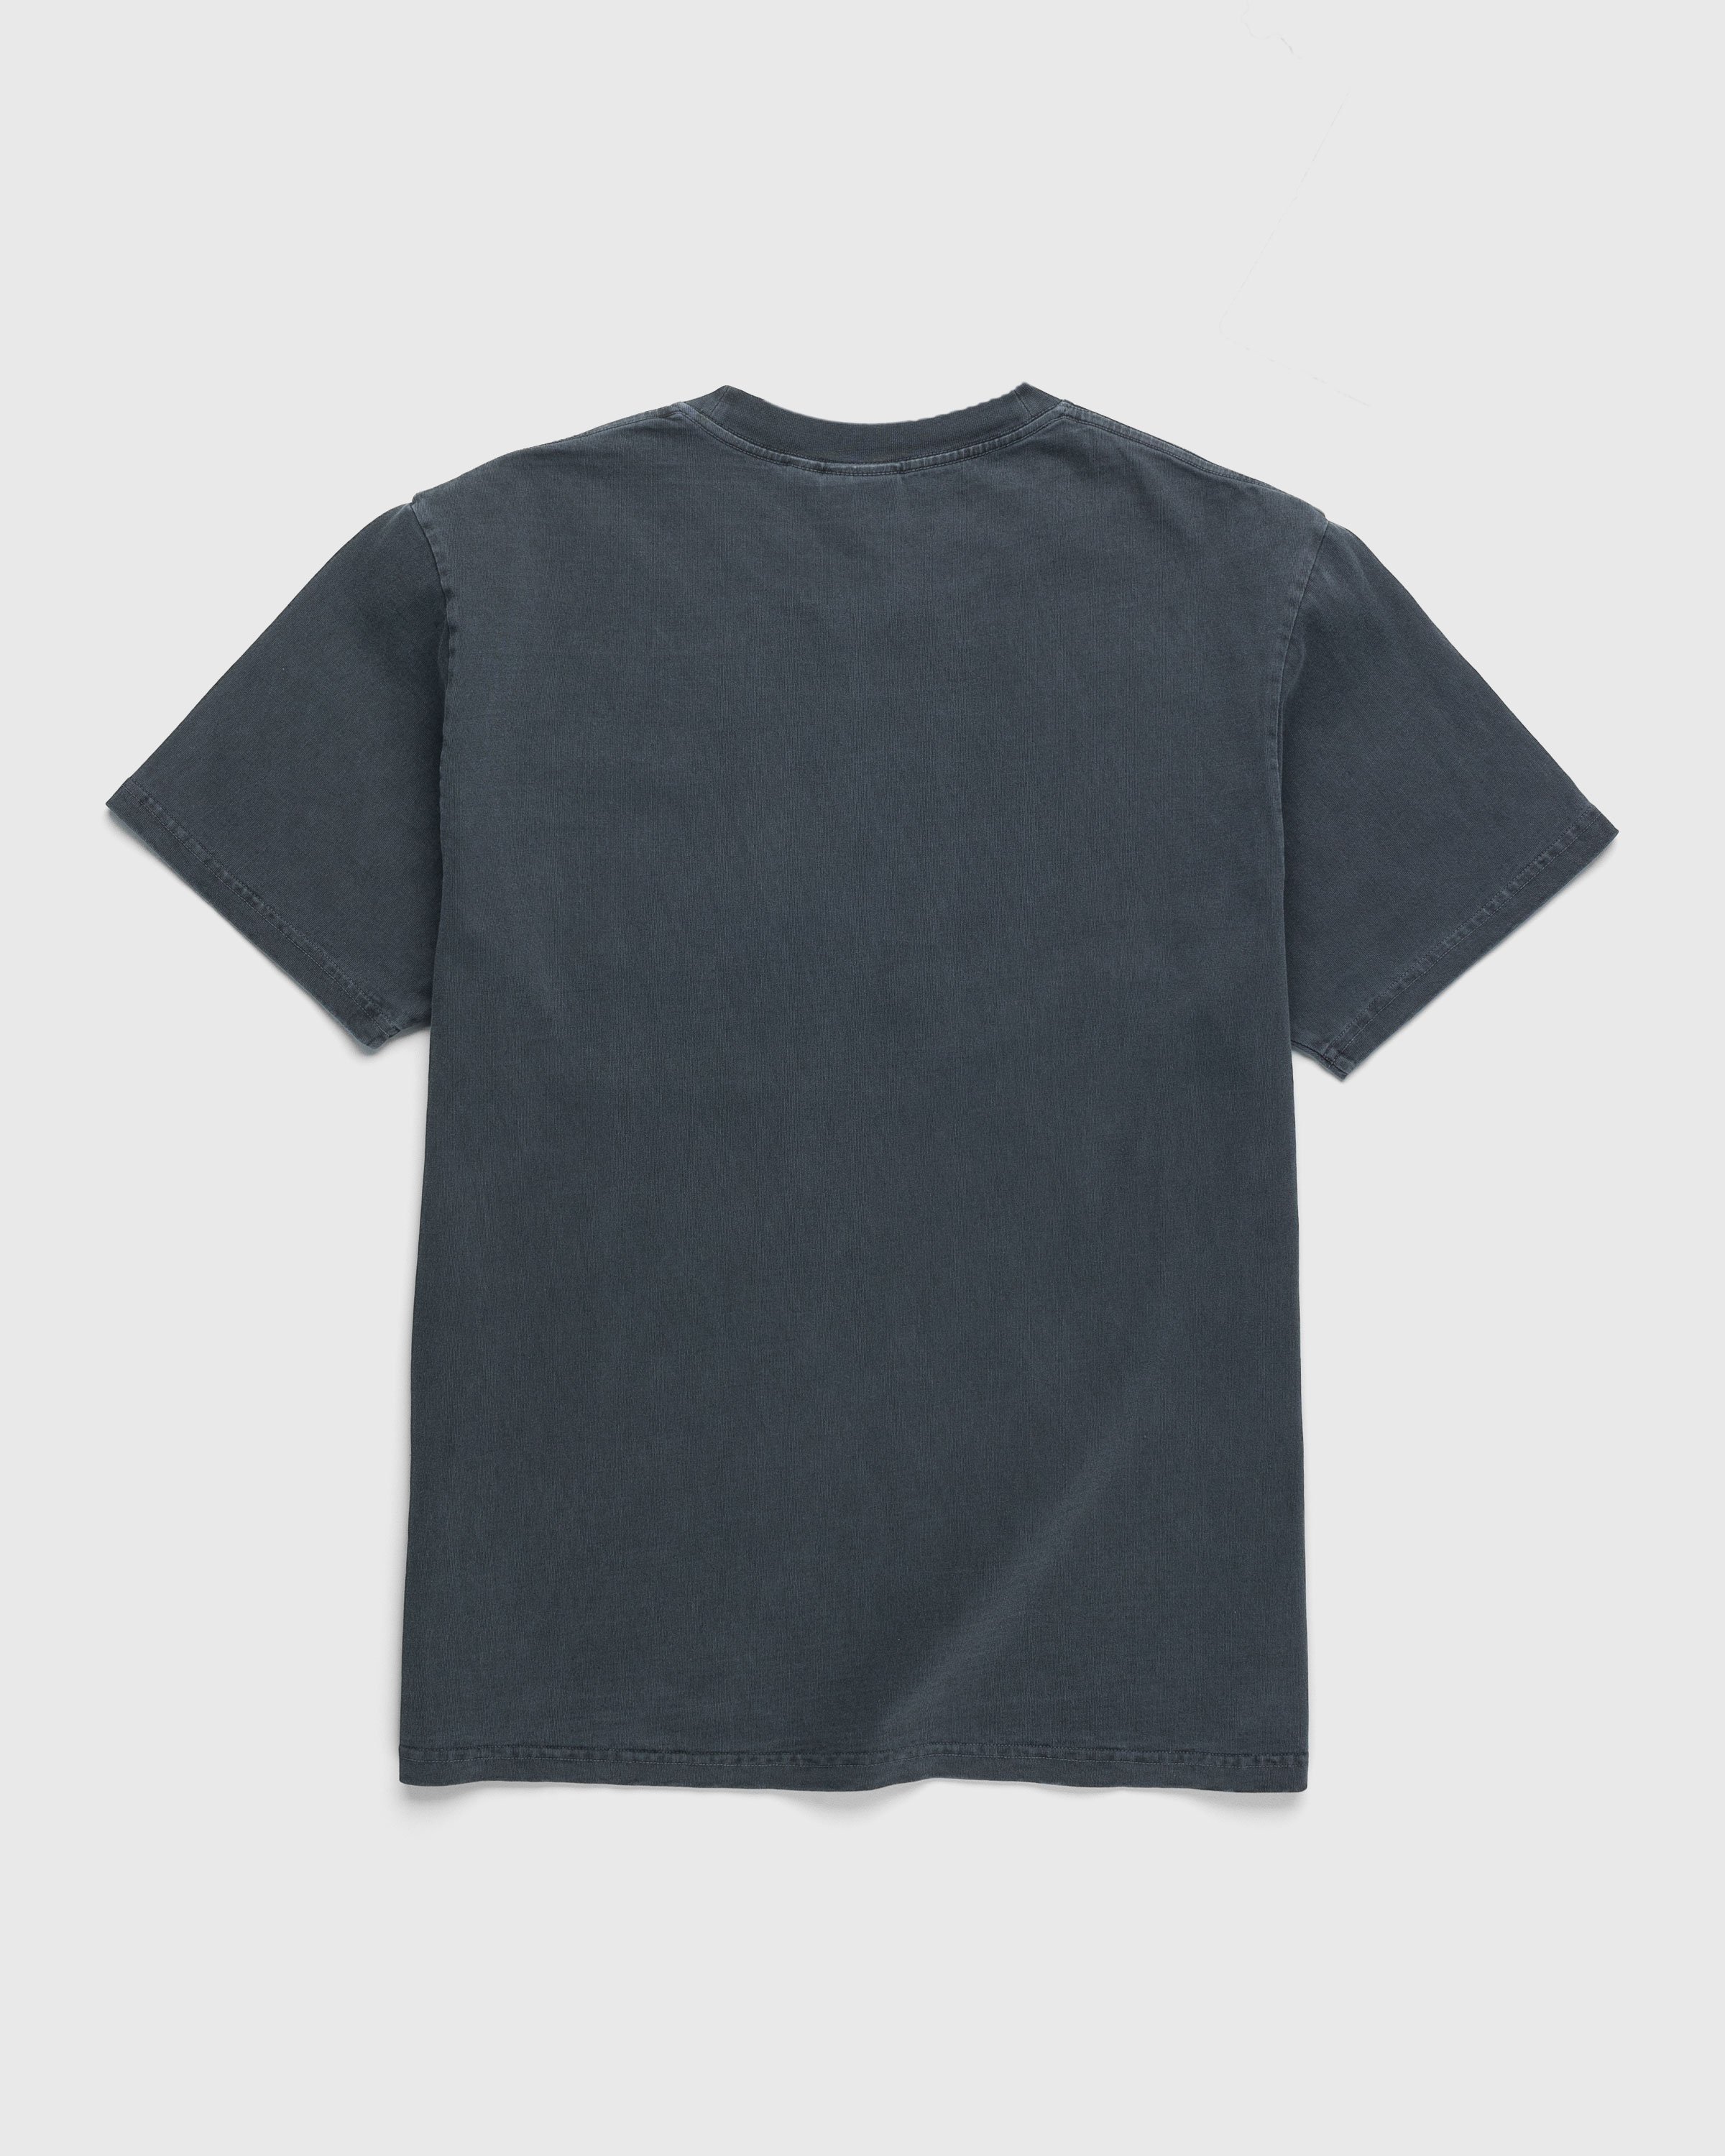 Gramicci - One Point Tee Grey Pigment - Clothing - Grey - Image 2